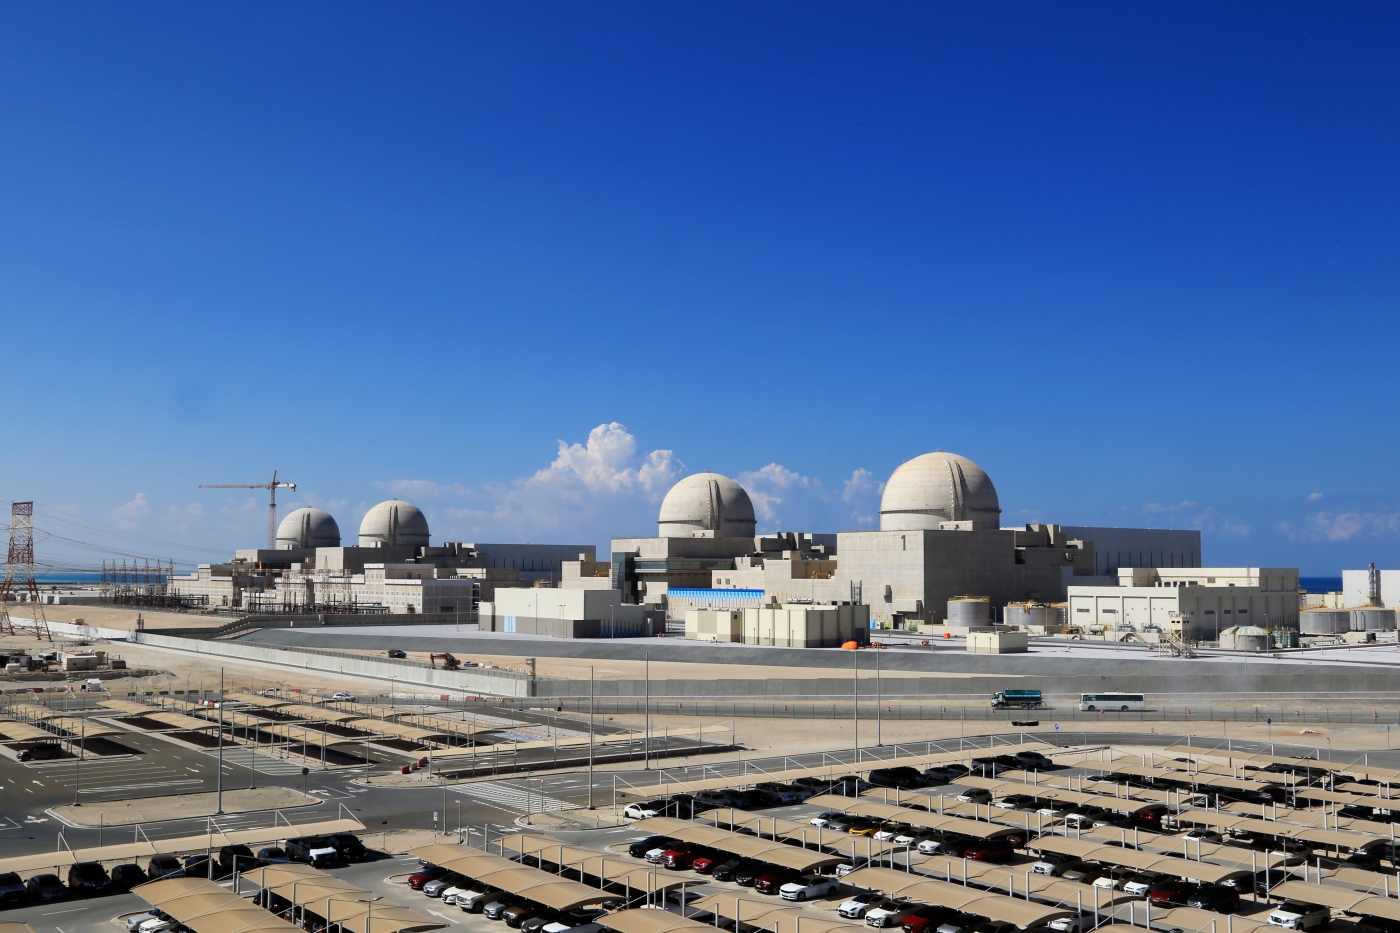 UAE starts up first nuclear power plant in the Arab world | Middle East